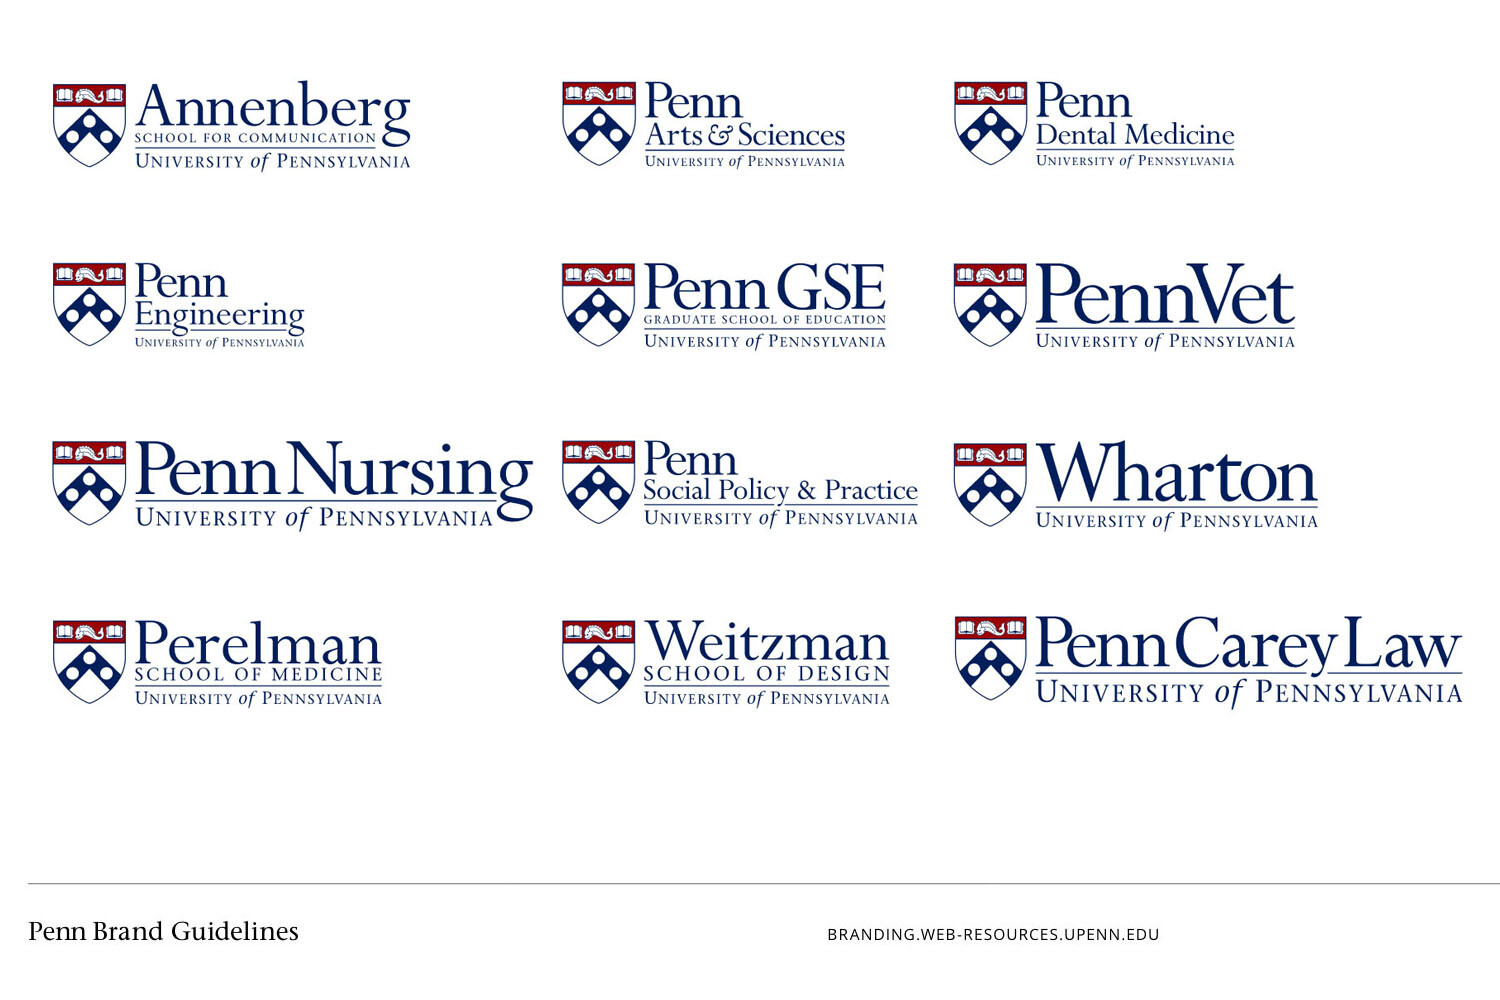 Screen capture showing the unified logos of Penn's 12 schools